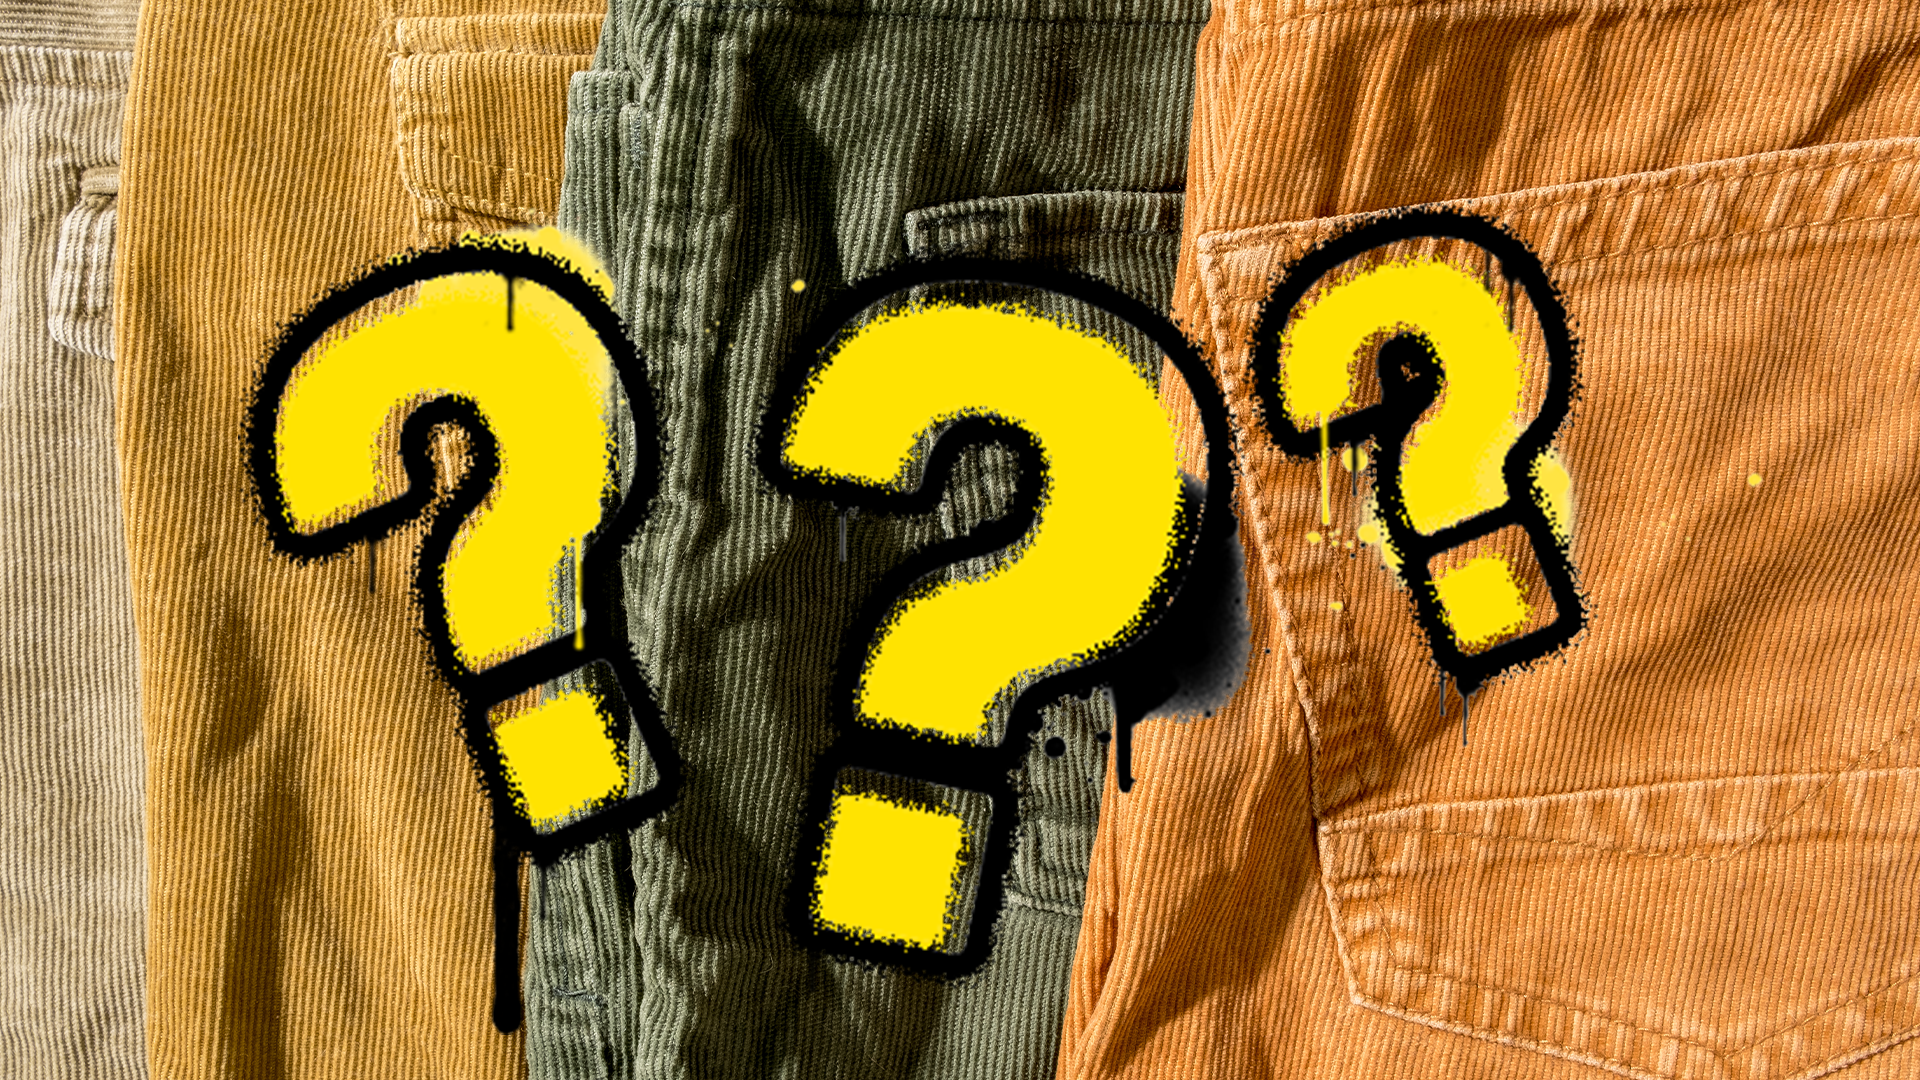 Trousers in dark colours and question marks